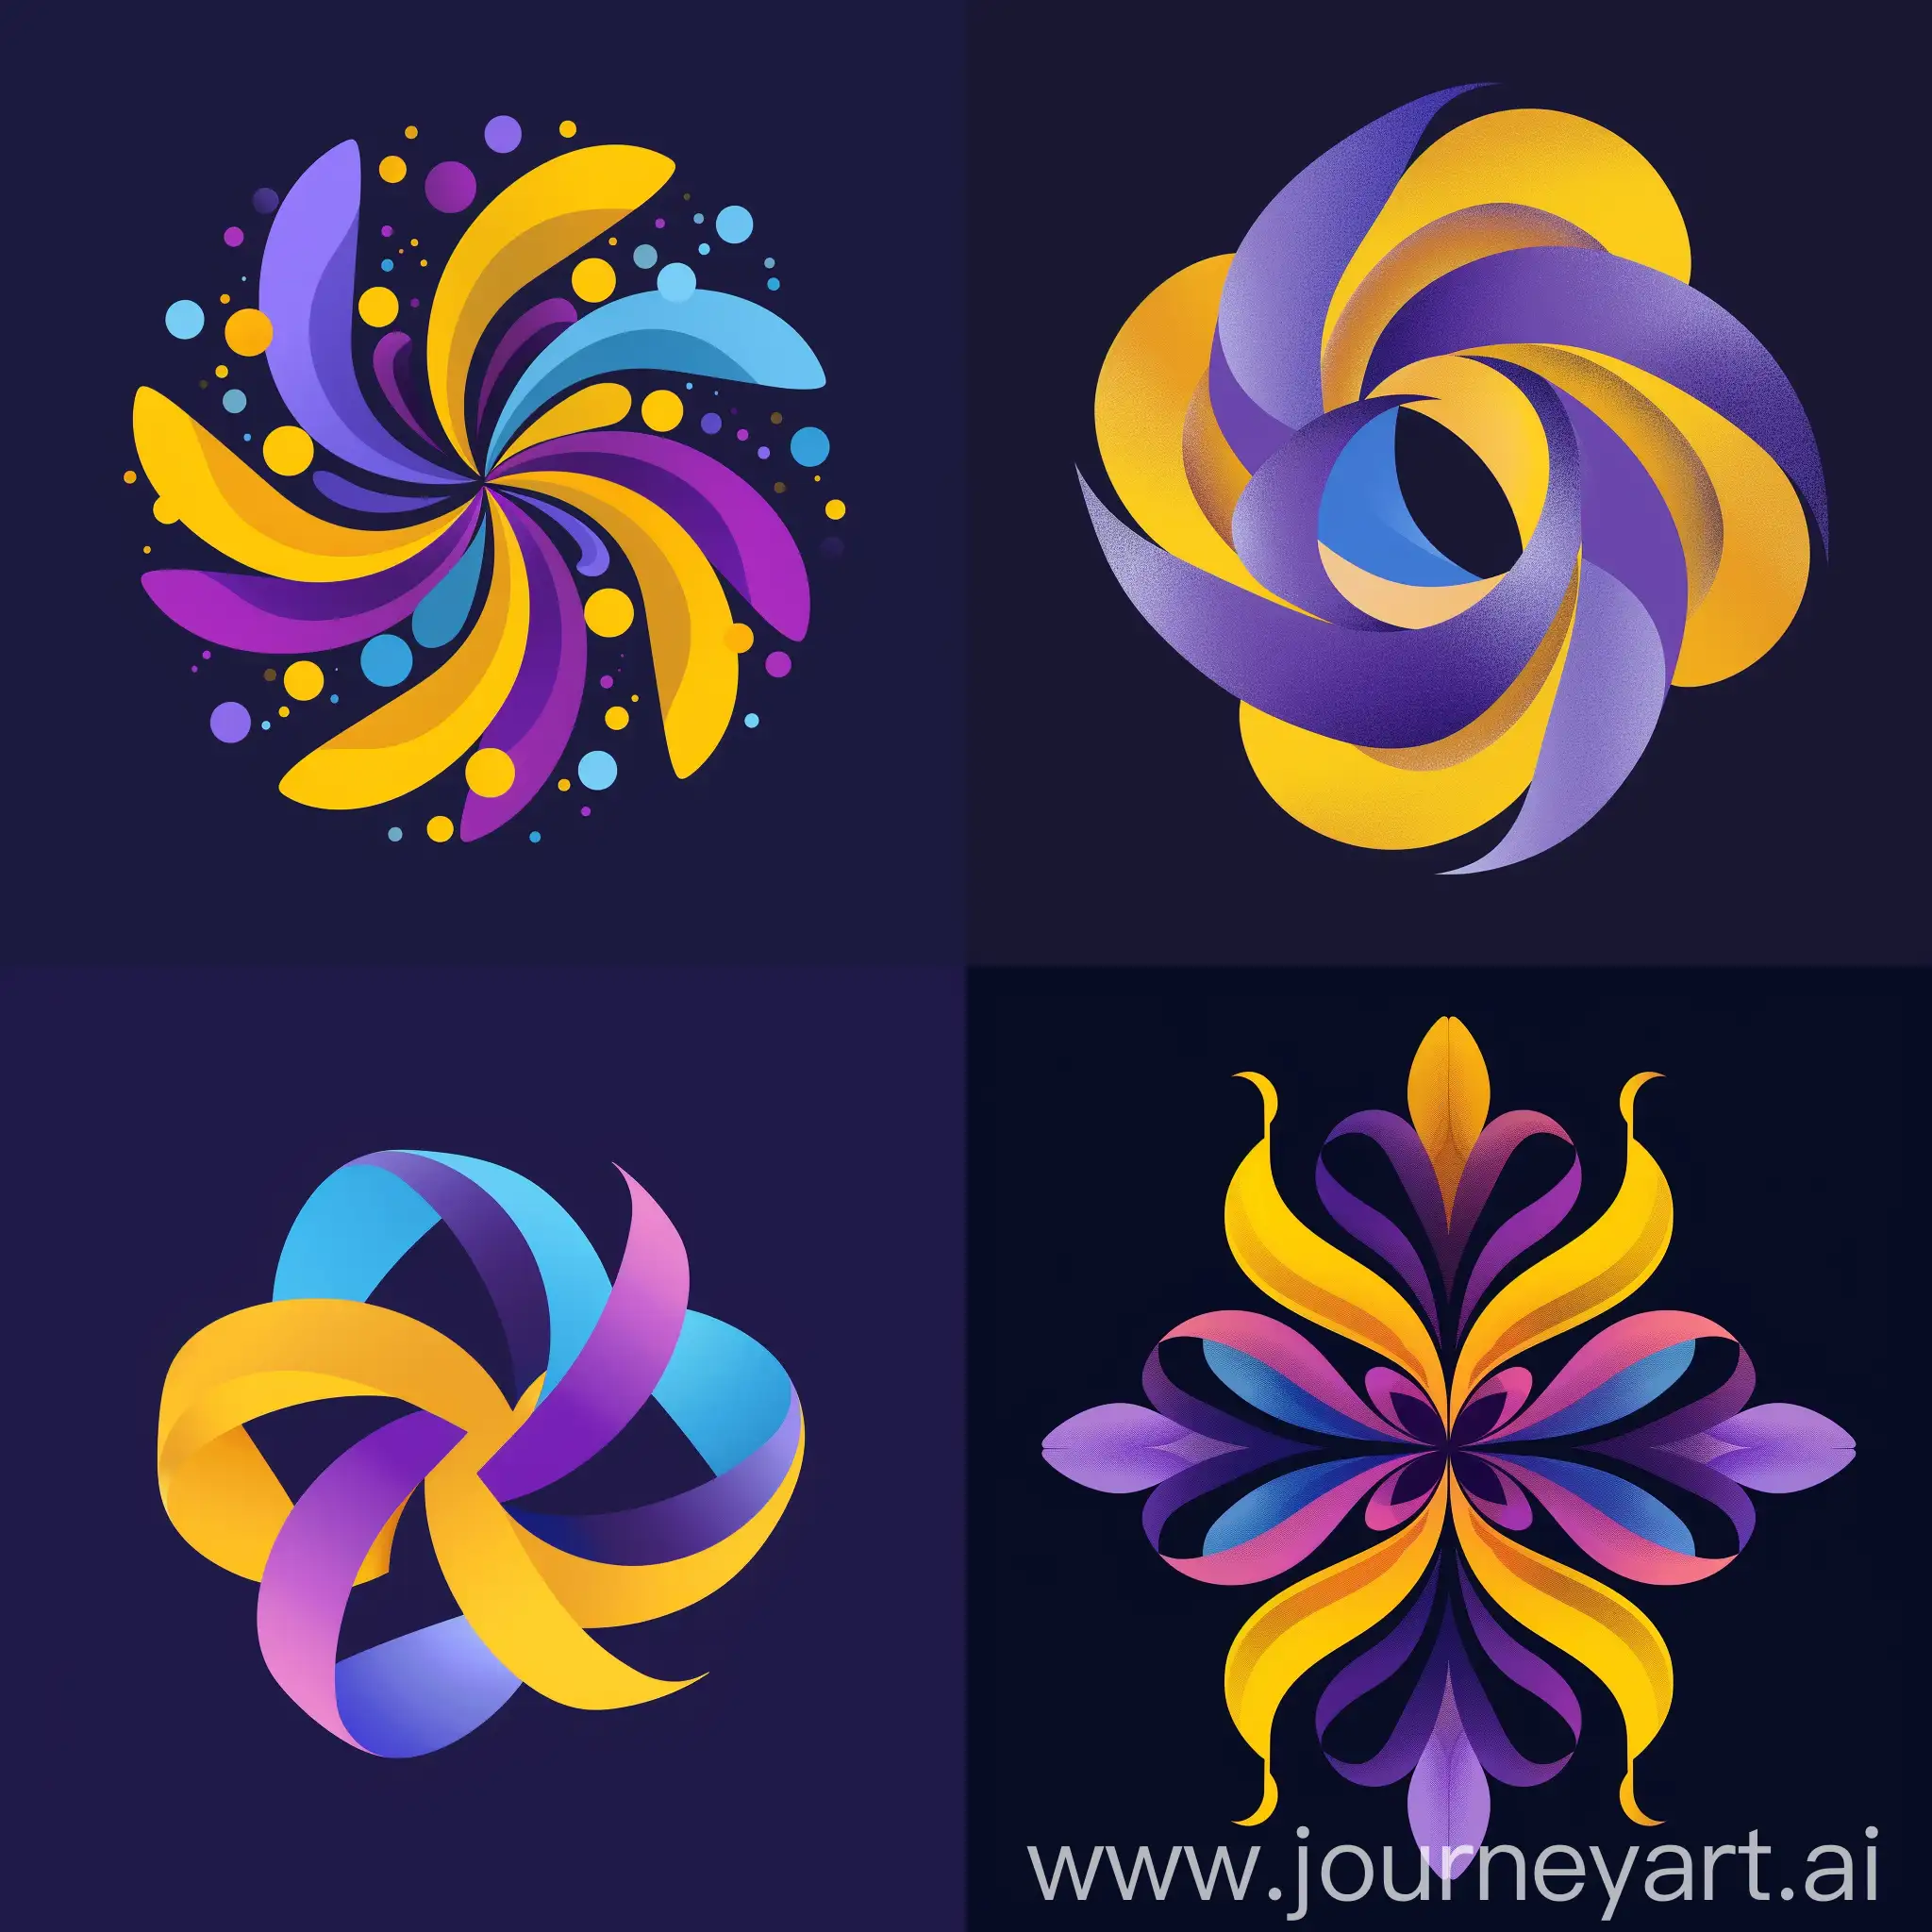 Create an attractive two-dimensional challenge logo called Nimaski challenge by combining purple, yellow, and blue colors.